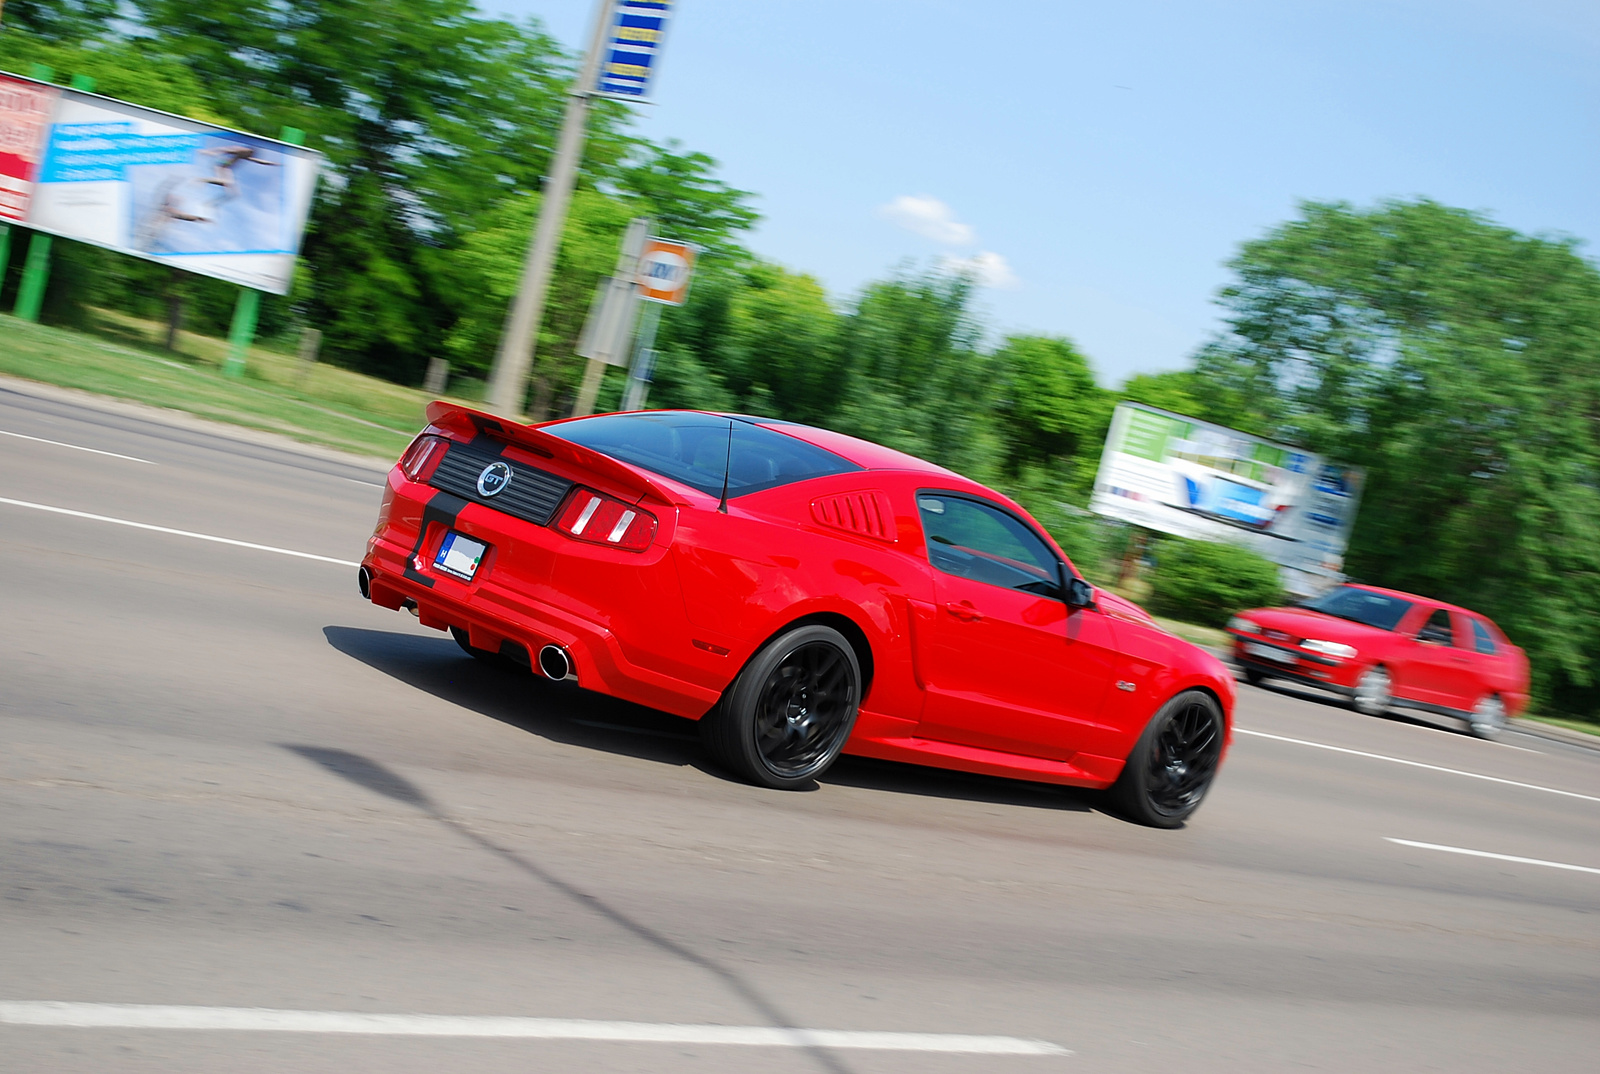 '10 Ford Mustang GT 5.0